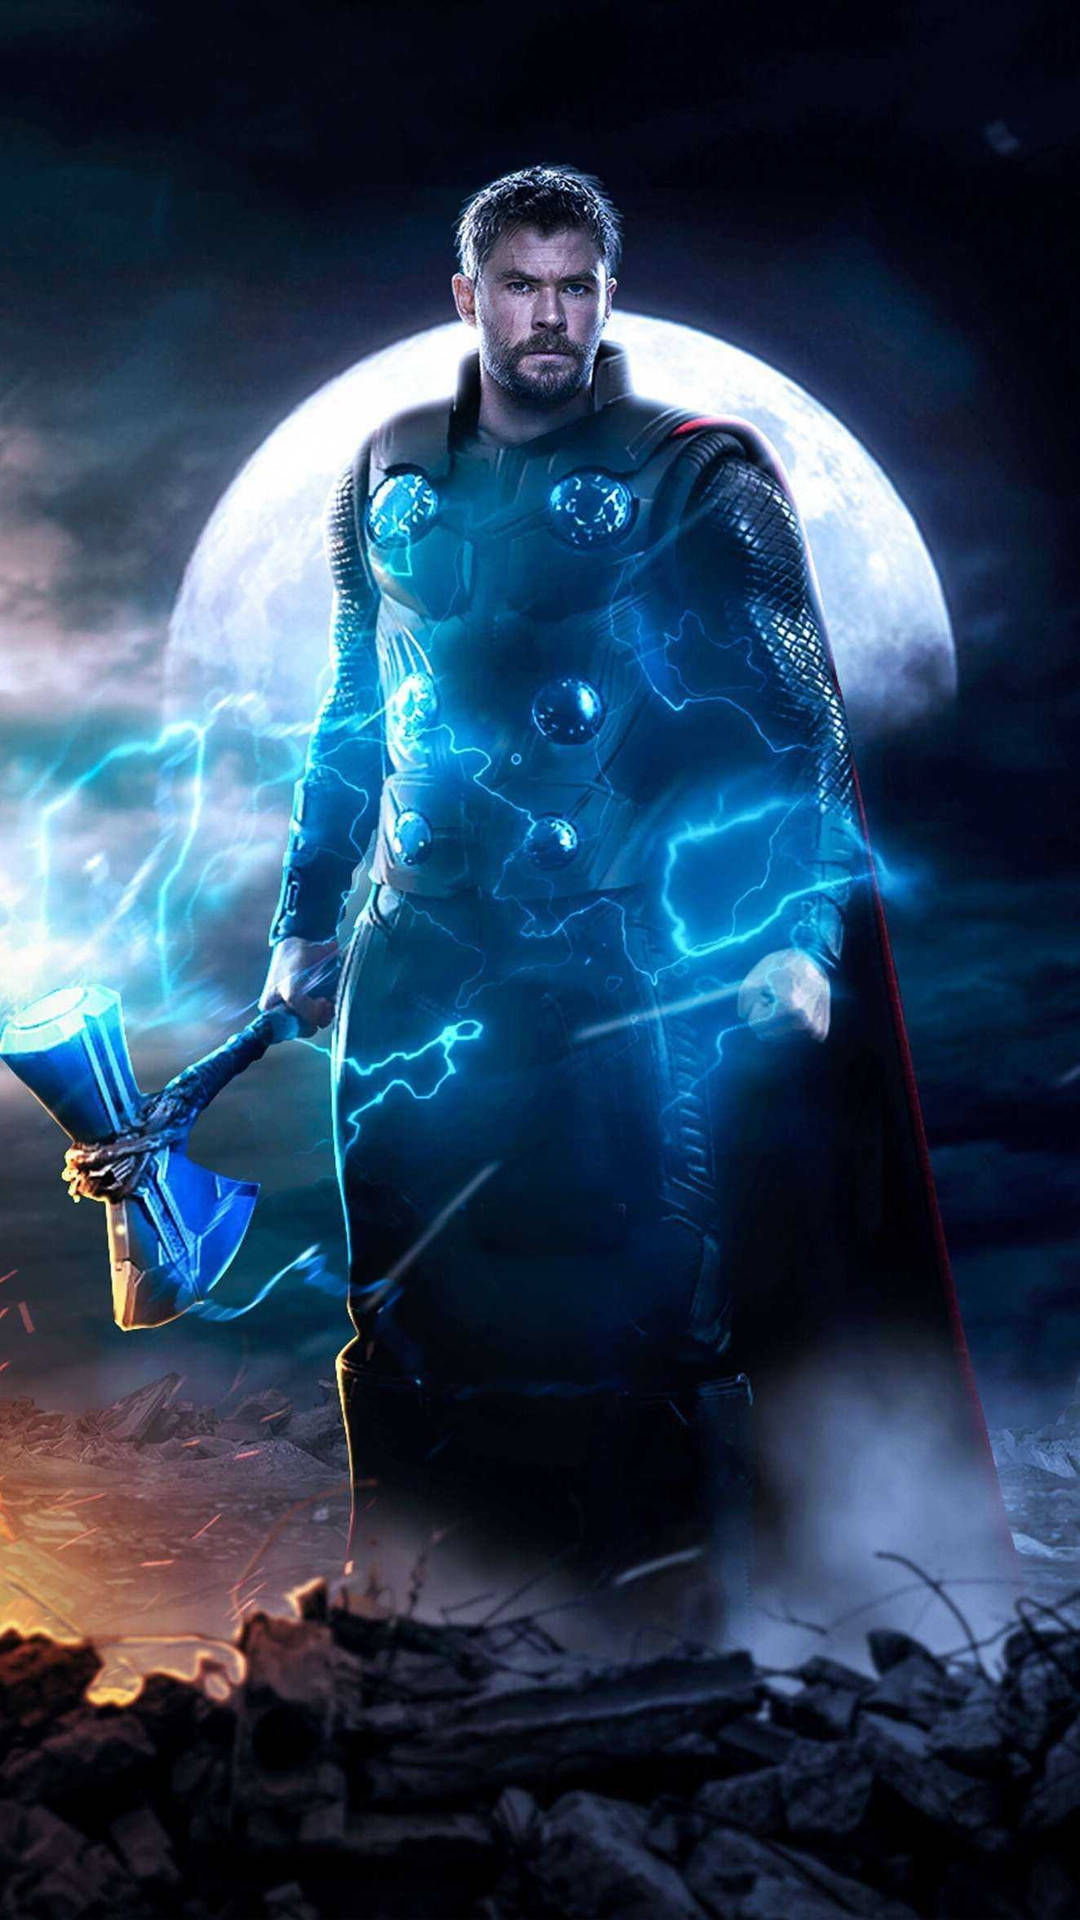 Free Thor Wallpaper Downloads, [200+] Thor Wallpapers for FREE | Wallpapers .com